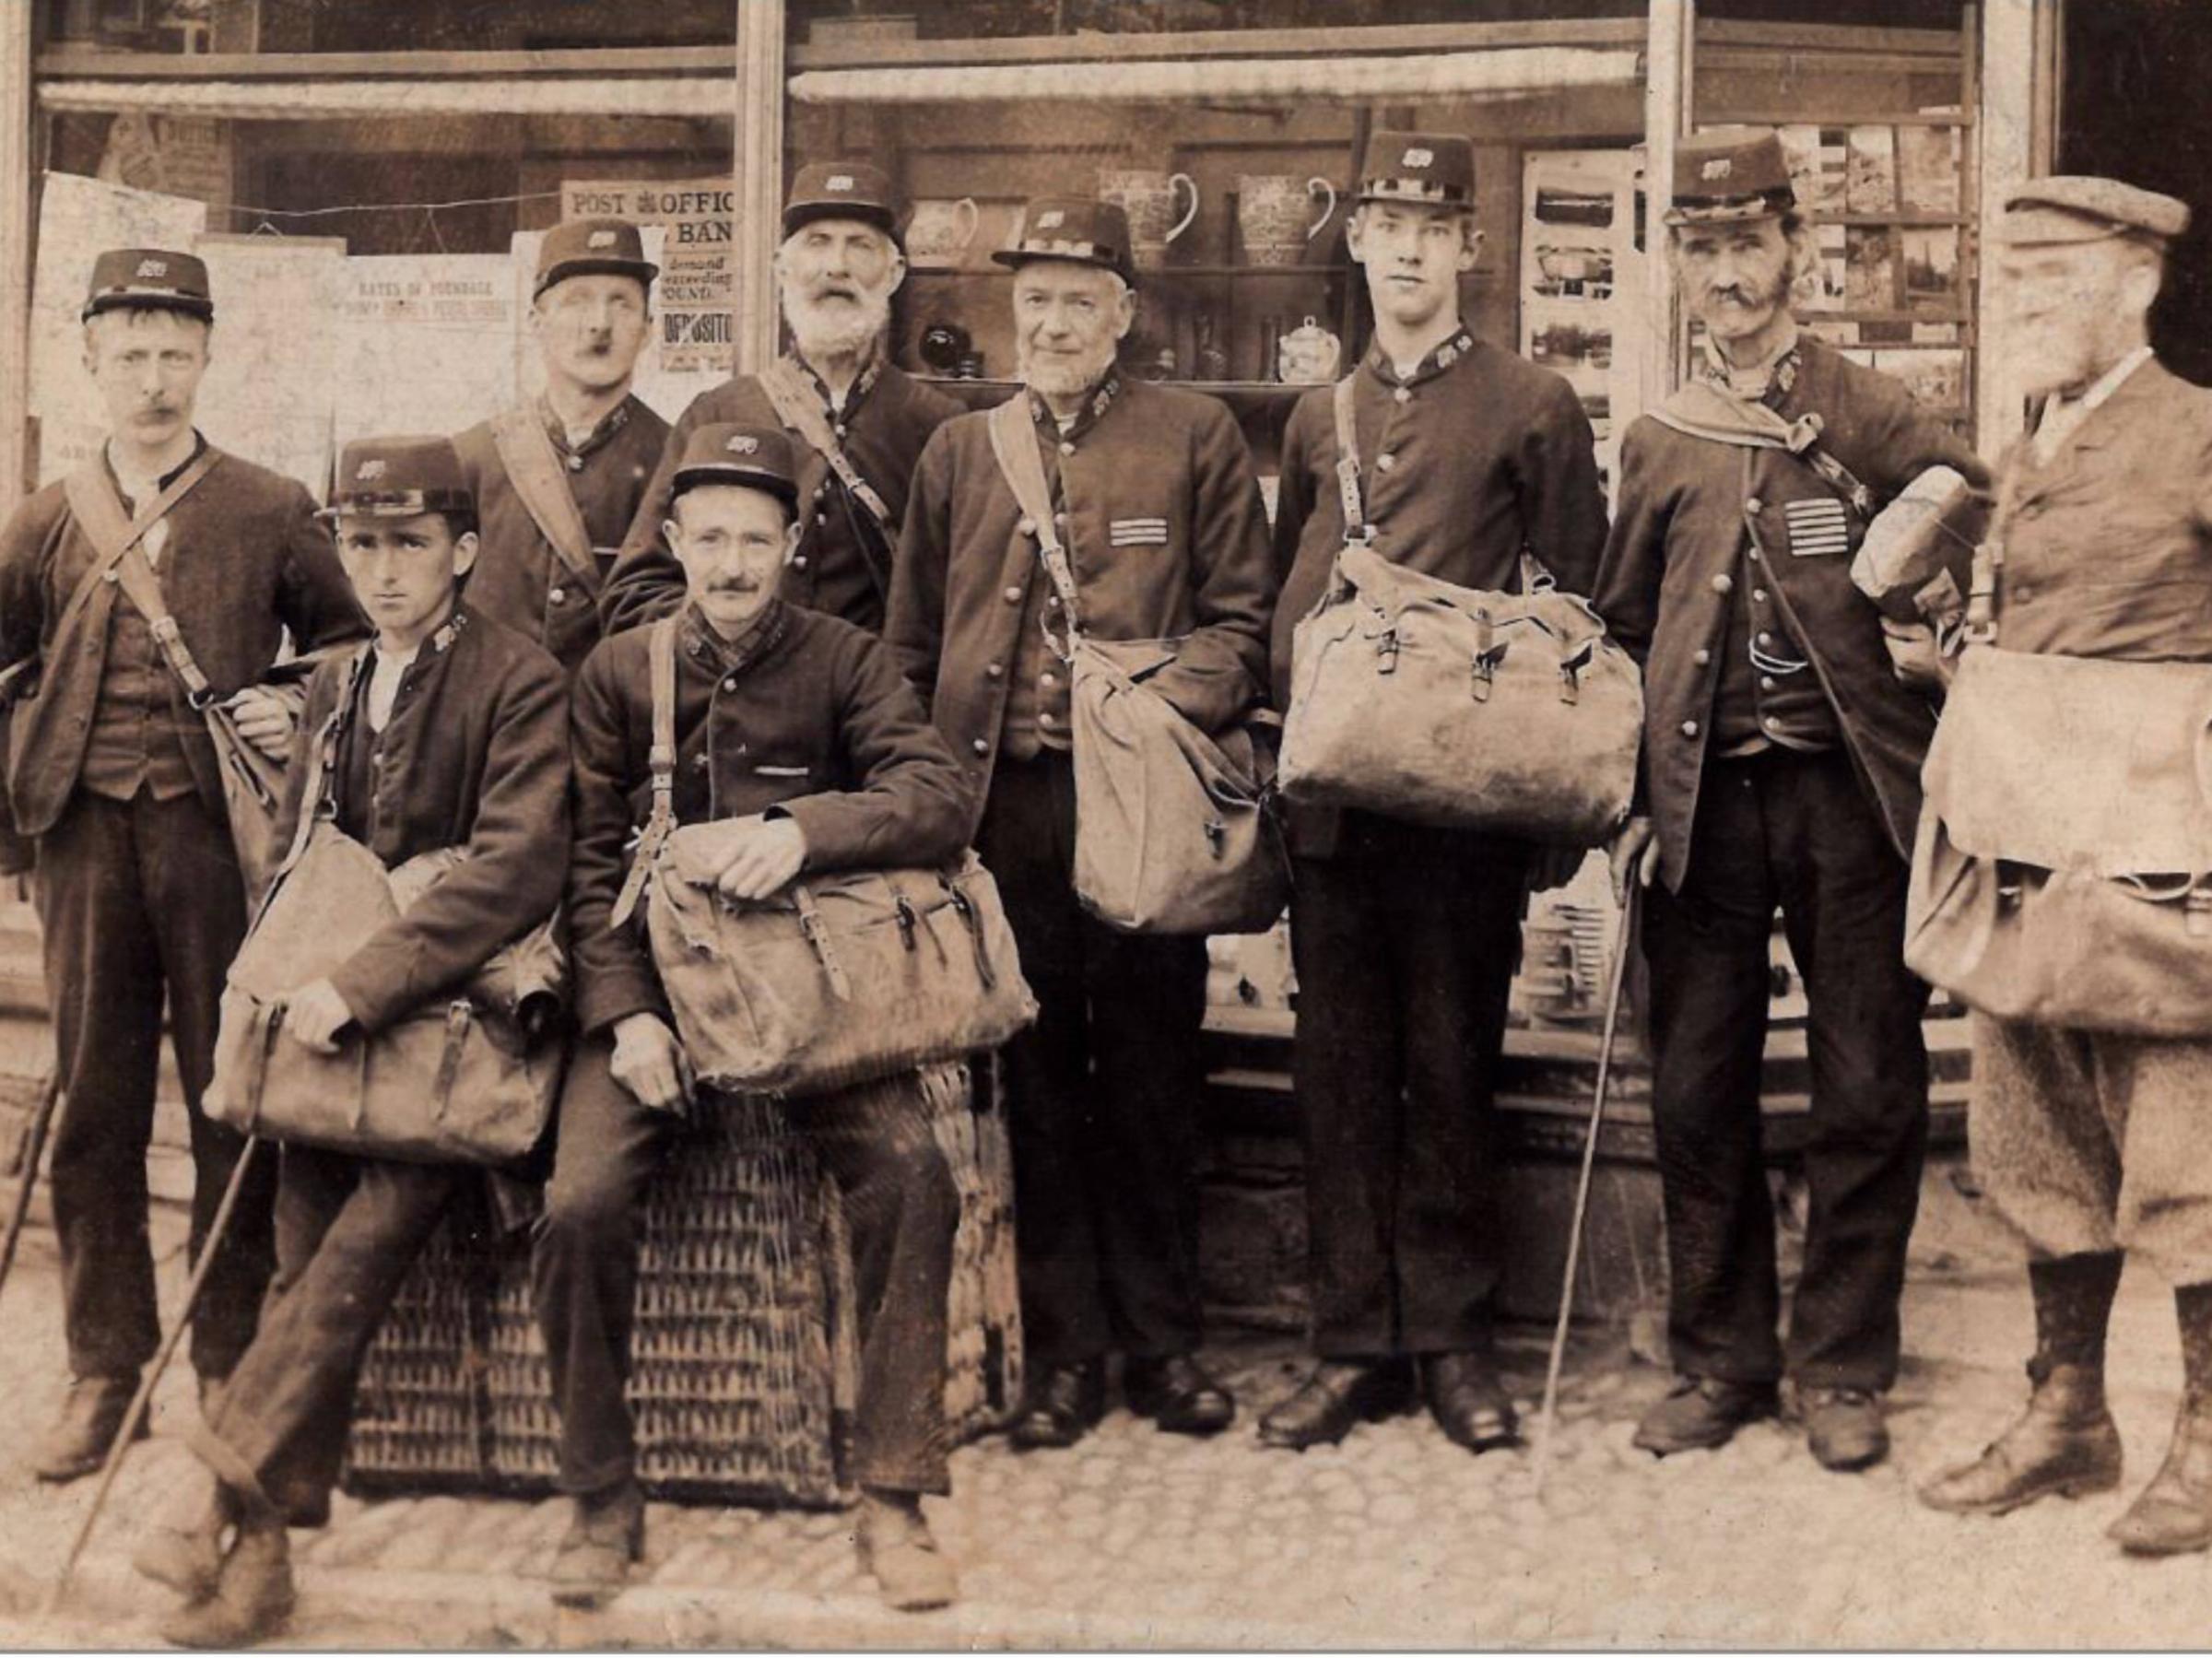 OLD: Broughton post office workers from around 150 years ago